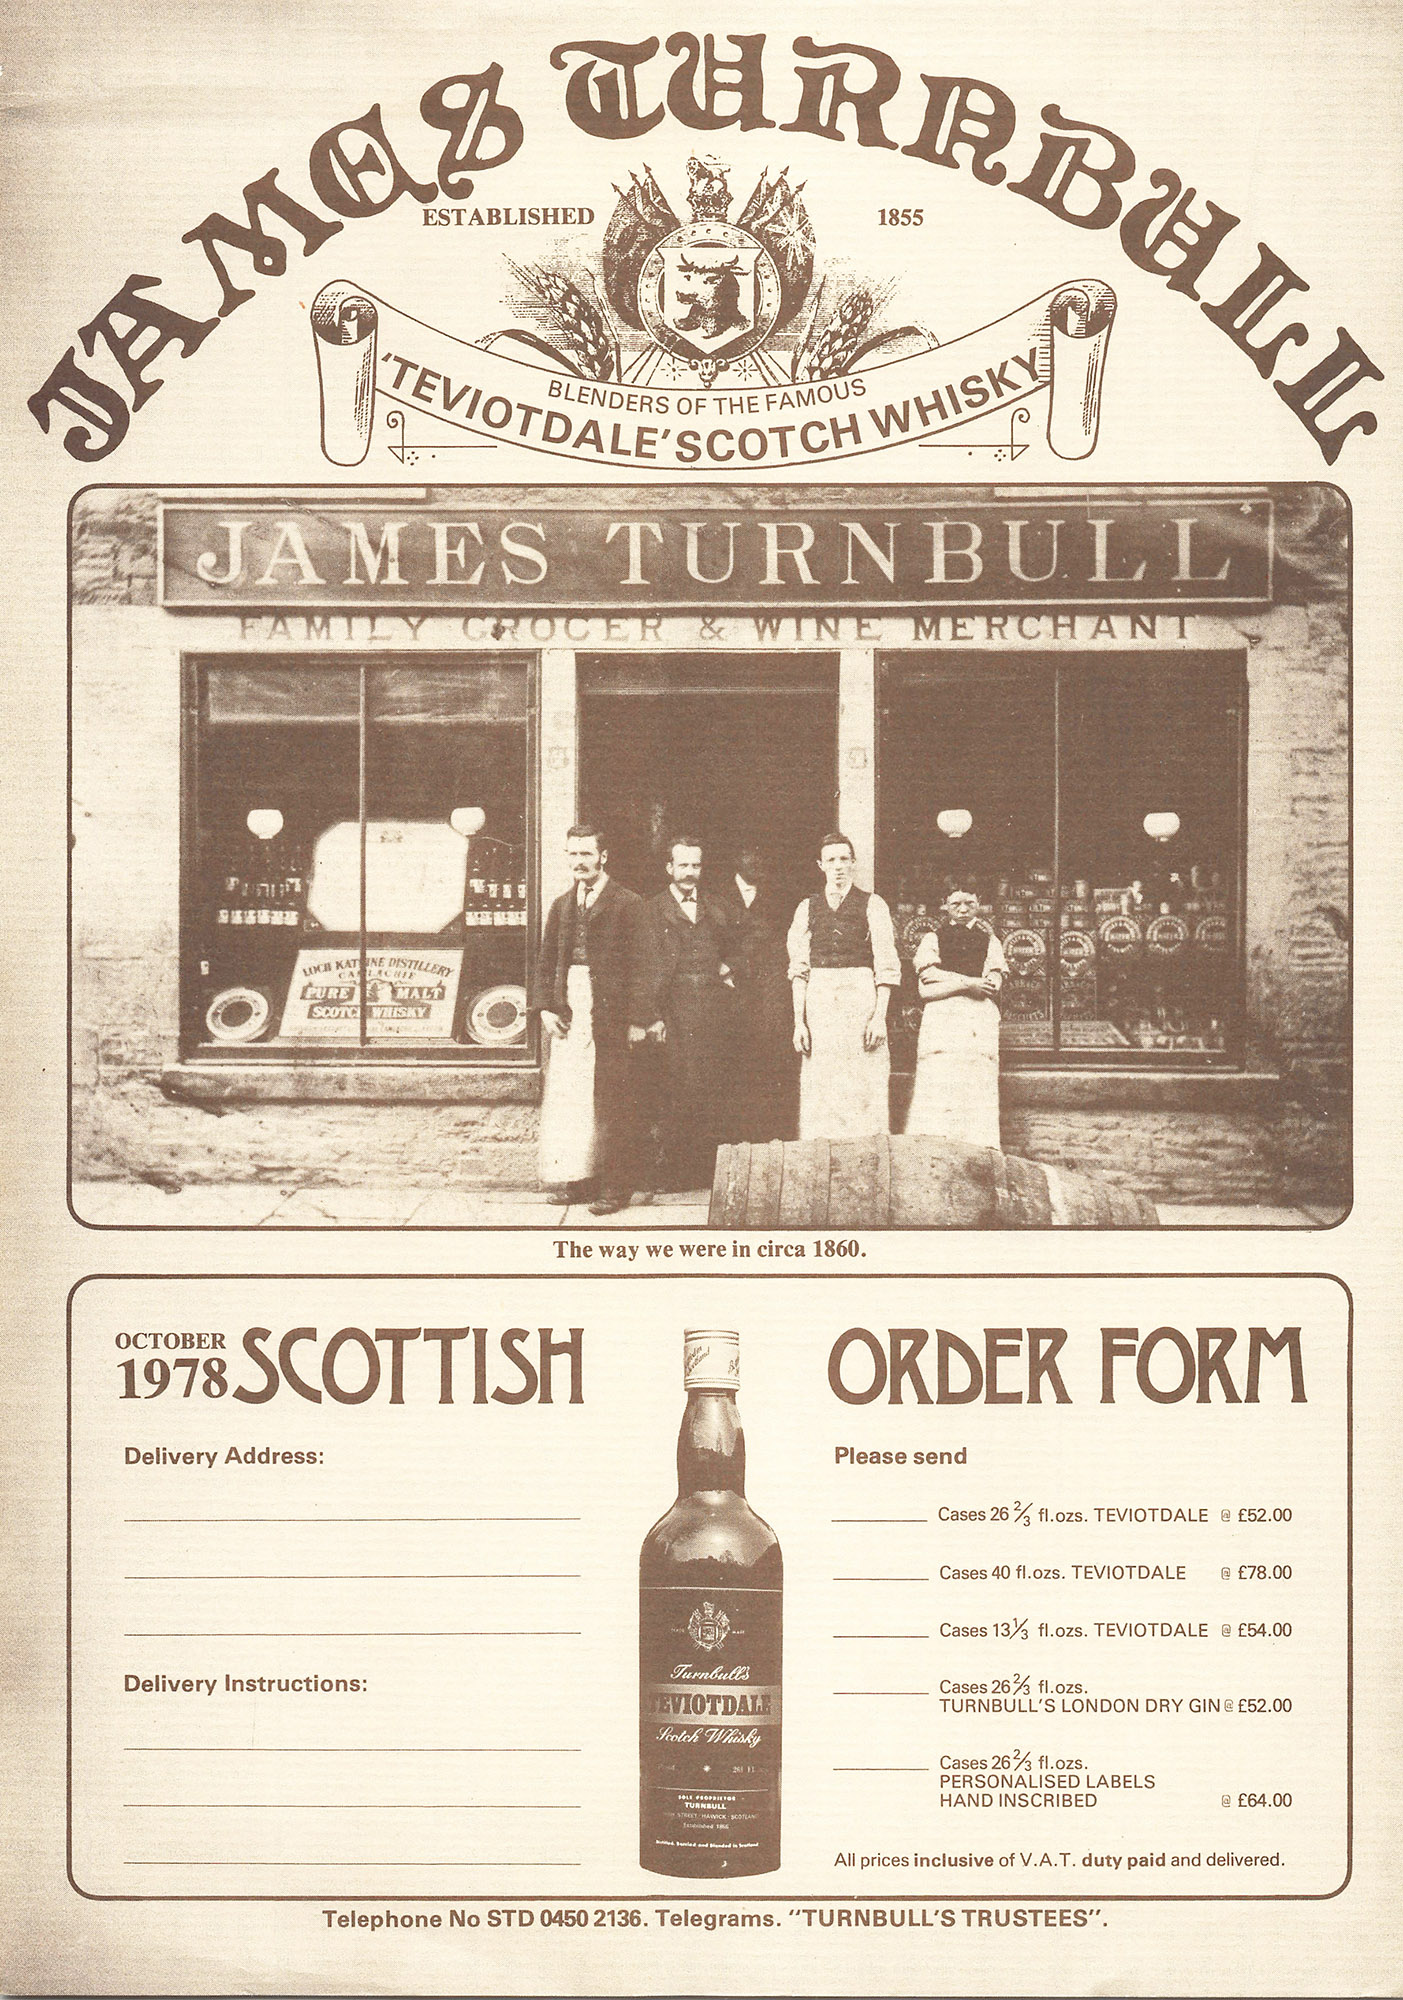 James Turnbull Family Grocer and Wine Merchant Order Form